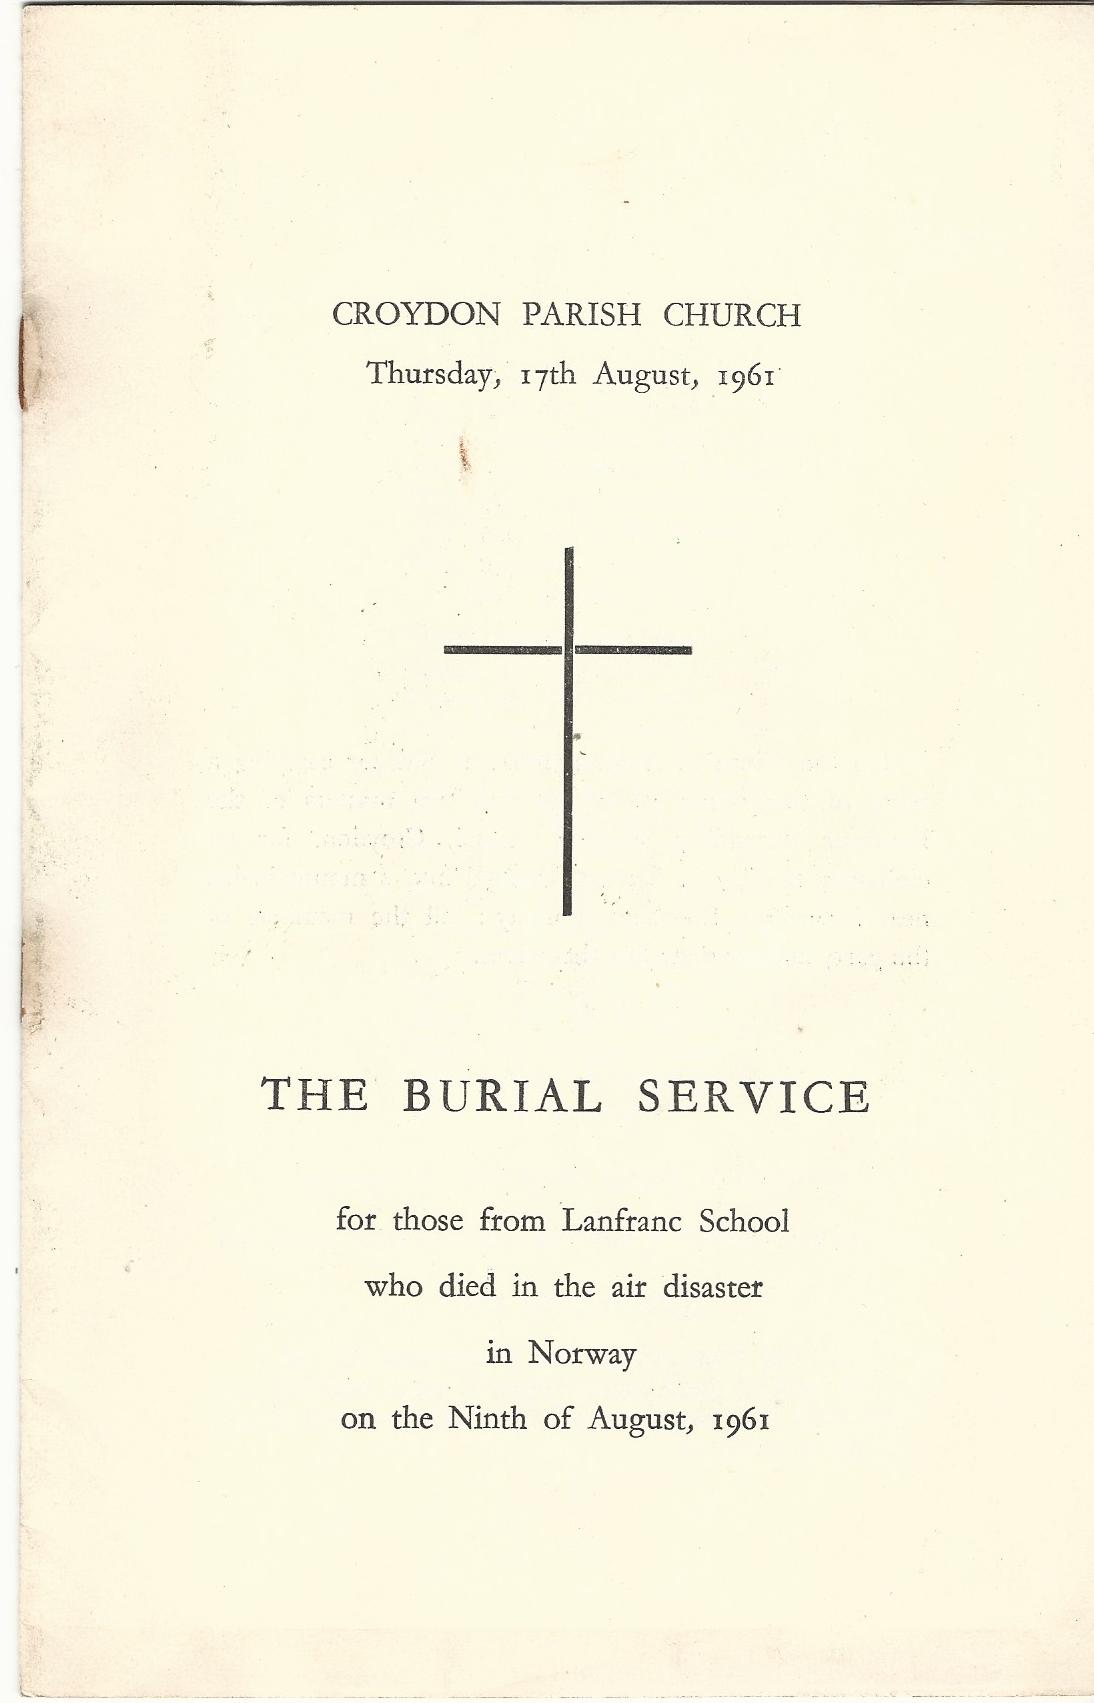 Image for The Burial Service for those from Lanfrac School who died in the air disaster in Norway on the Ninth of August, 1961 - Croydon Parish Church, Thursday, 17th August, 1961.